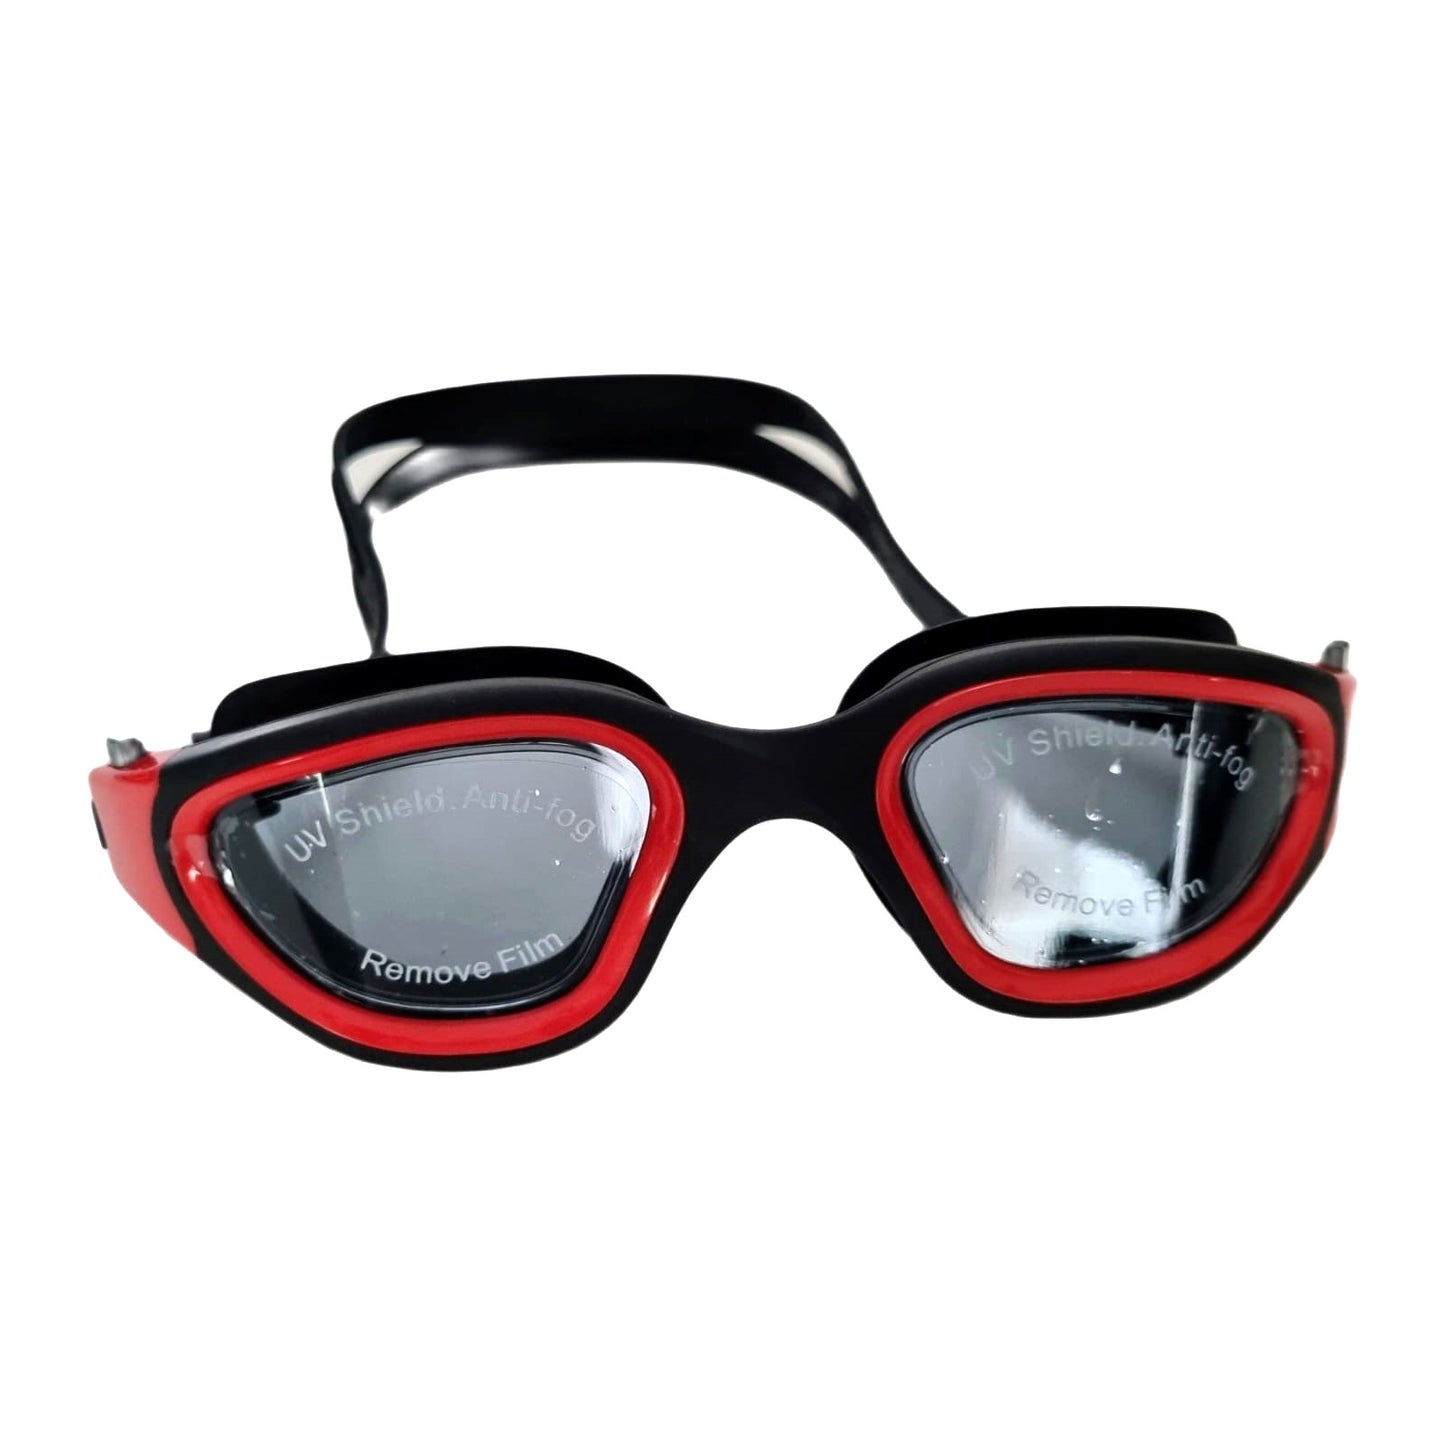 FLOWOLF FH1 Open Water Goggles - Red/Blk Clear Lens